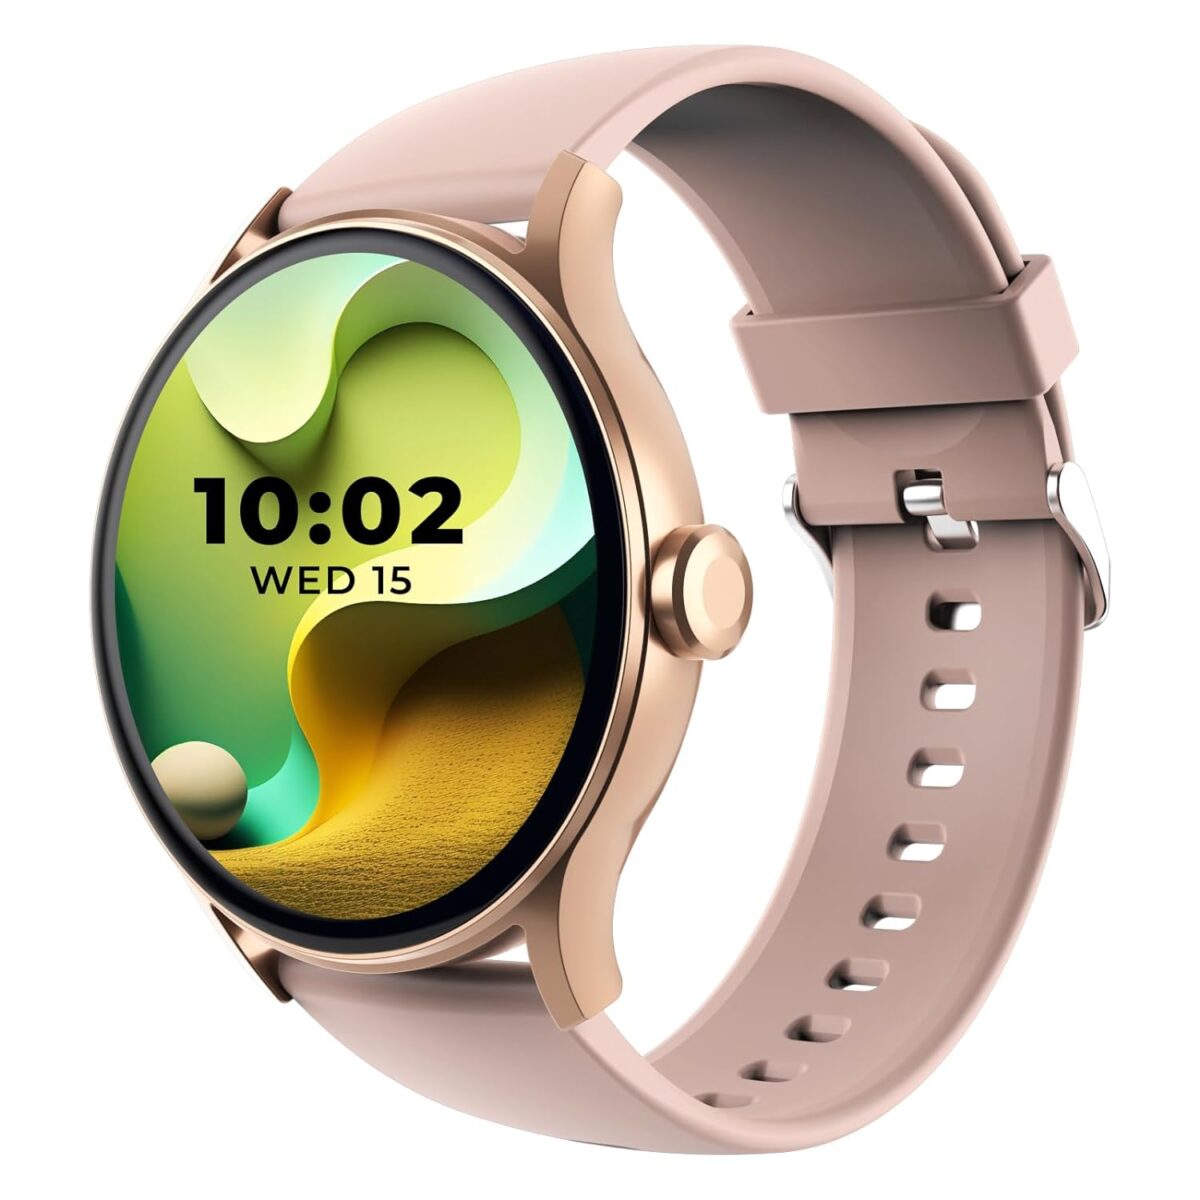 Top 20 best-selling smartwatches on Amazon India